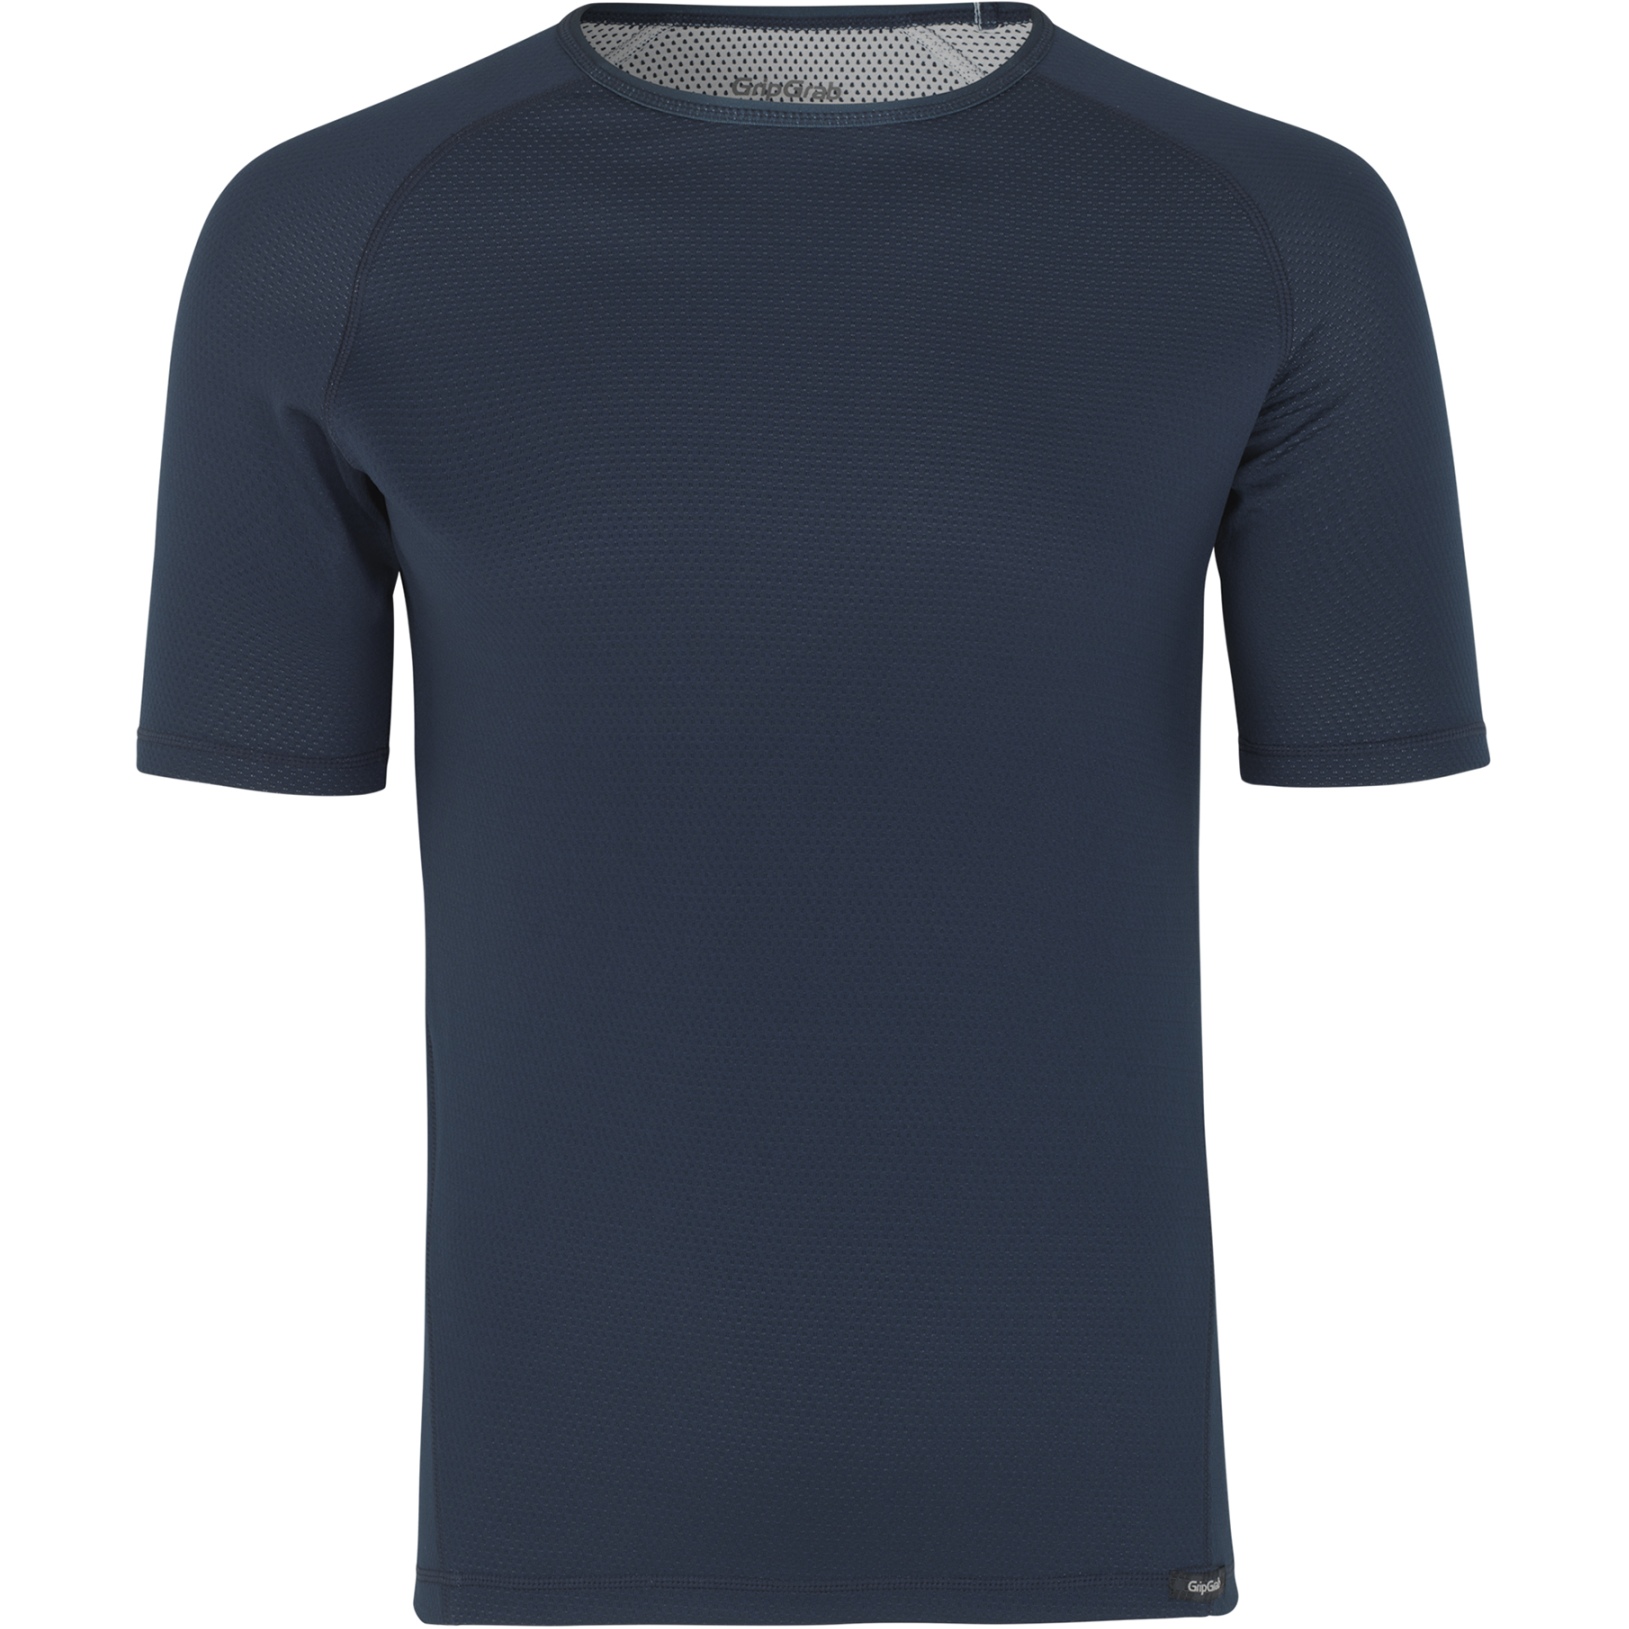 Picture of GripGrab Ride Thermal Short Sleeve Base Layer - Navy Blue